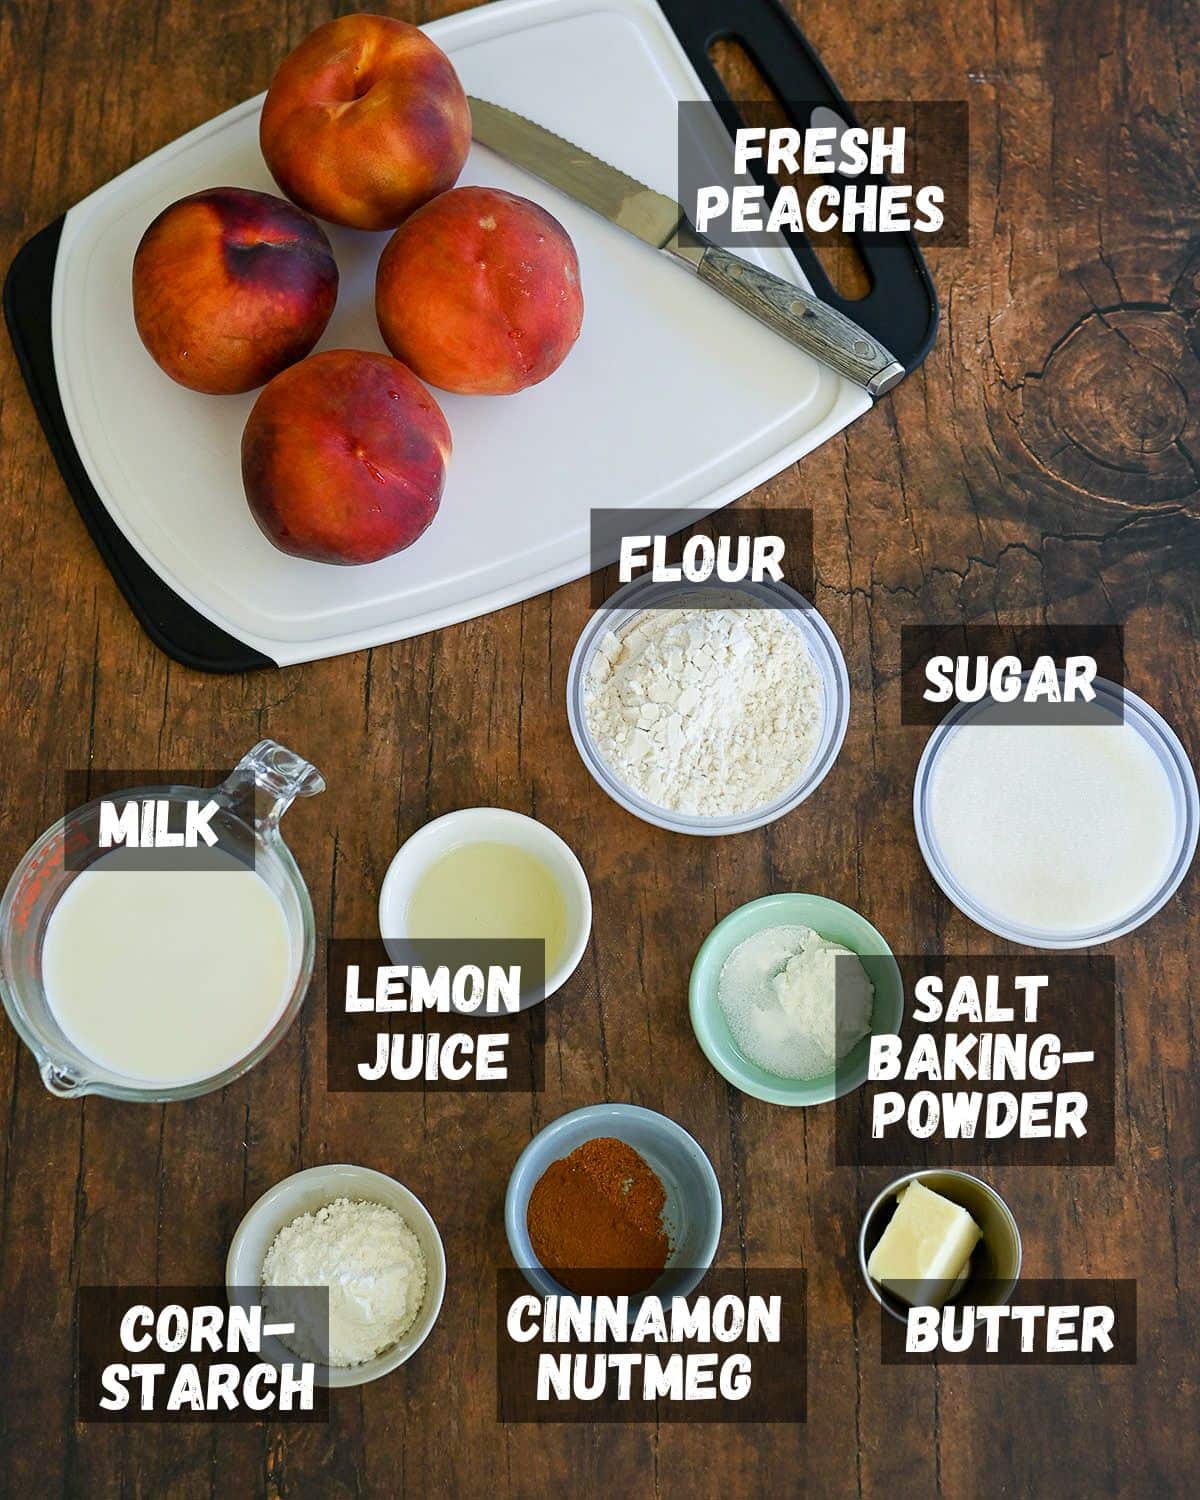 Ingredients shown for making peach cobbler. 